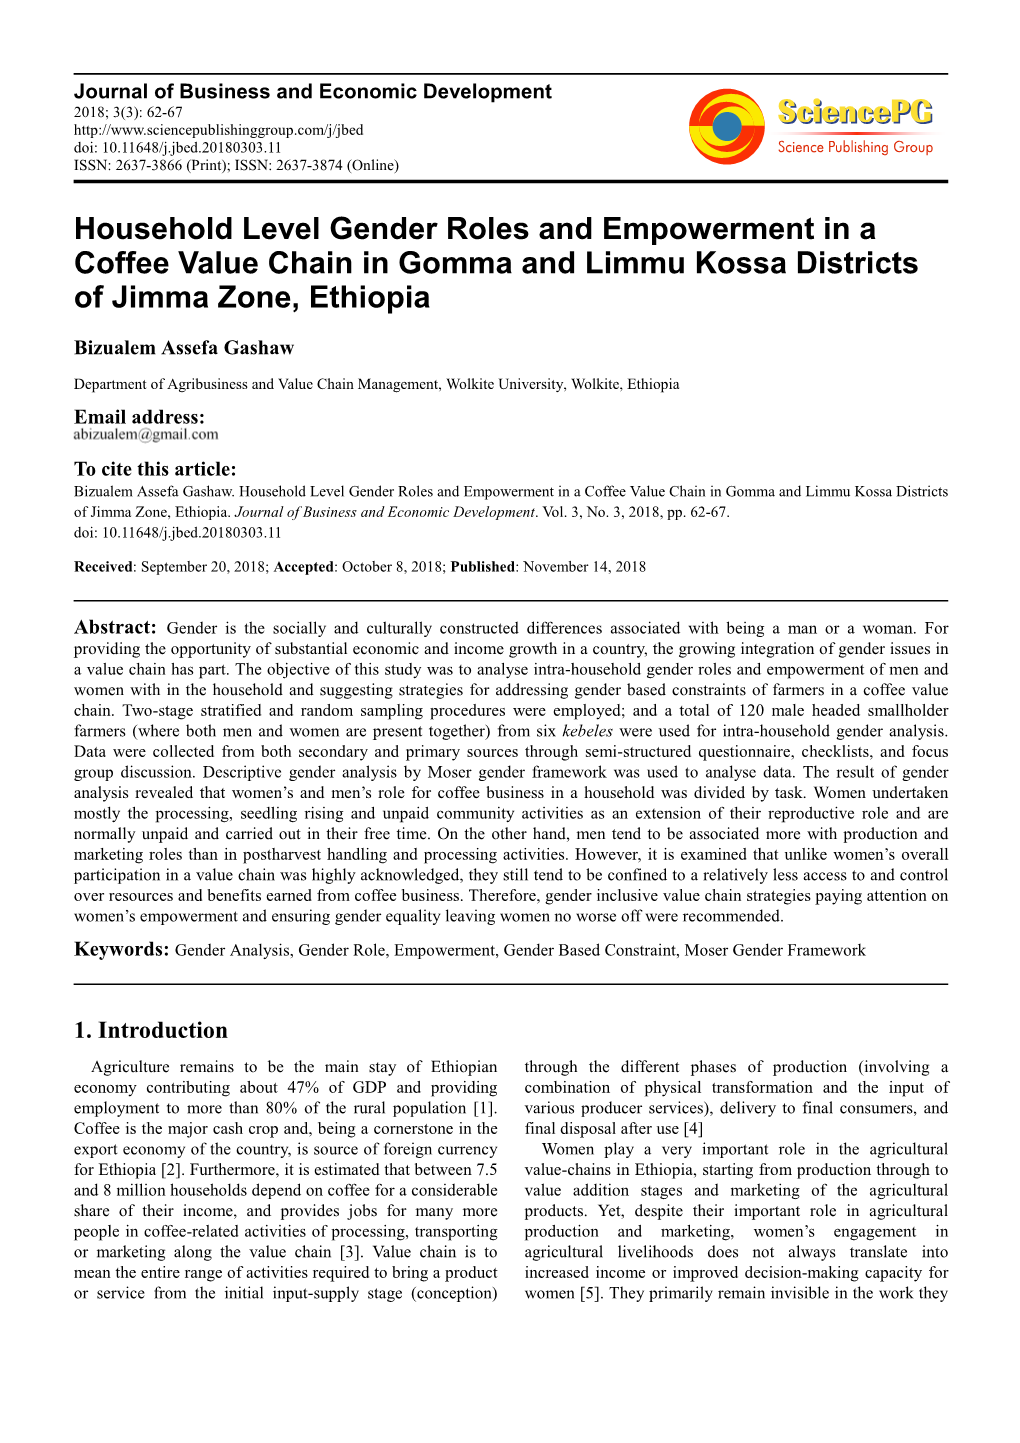 Household Level Gender Roles and Empowerment in a Coffee Value Chain in Gomma and Limmu Kossa Districts of Jimma Zone, Ethiopia